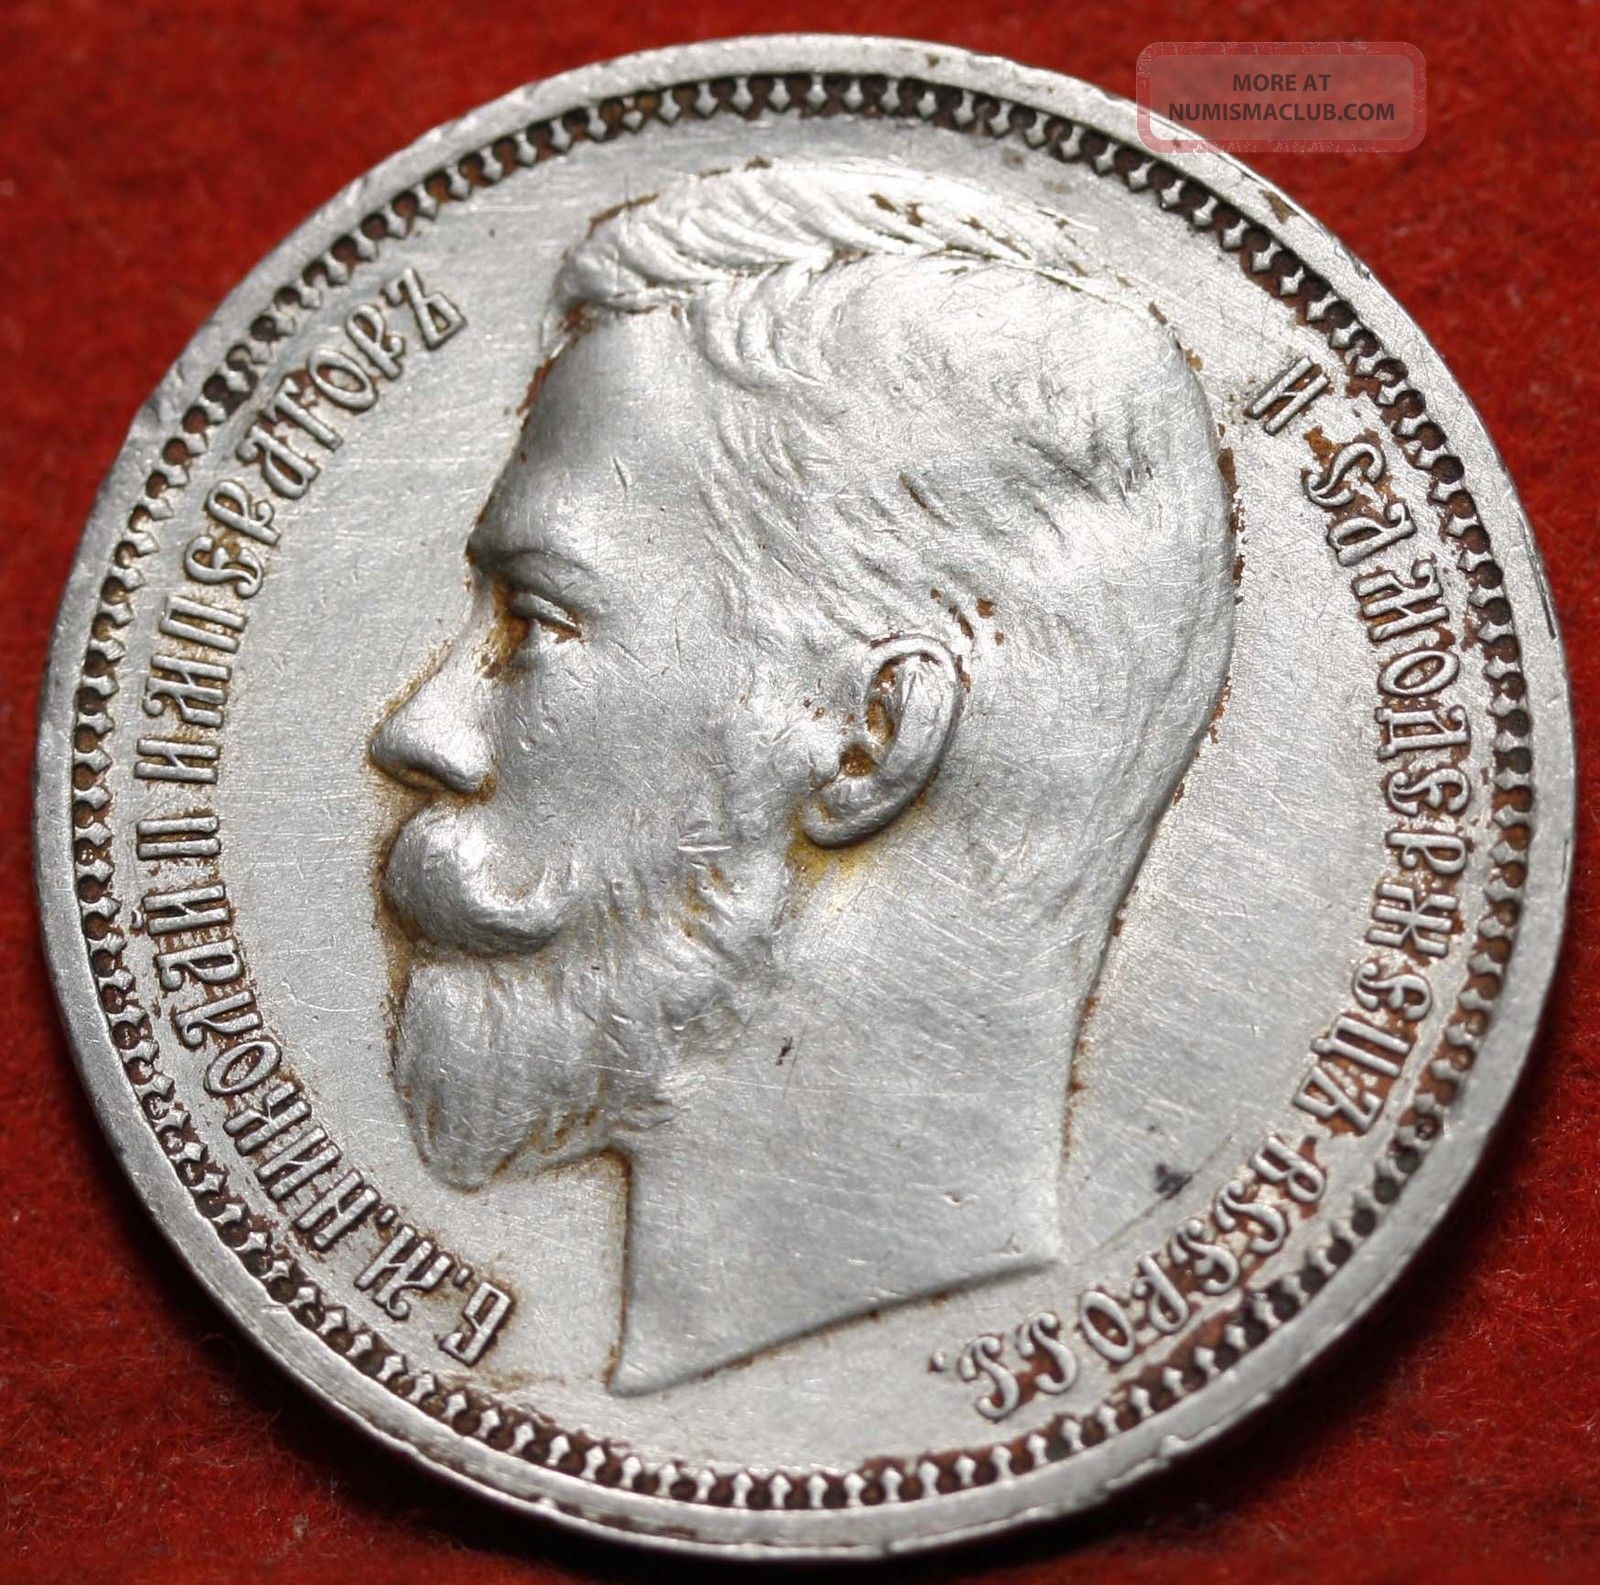 Circulated 1912 Russia Rouble Silver Foreign Coin S/h